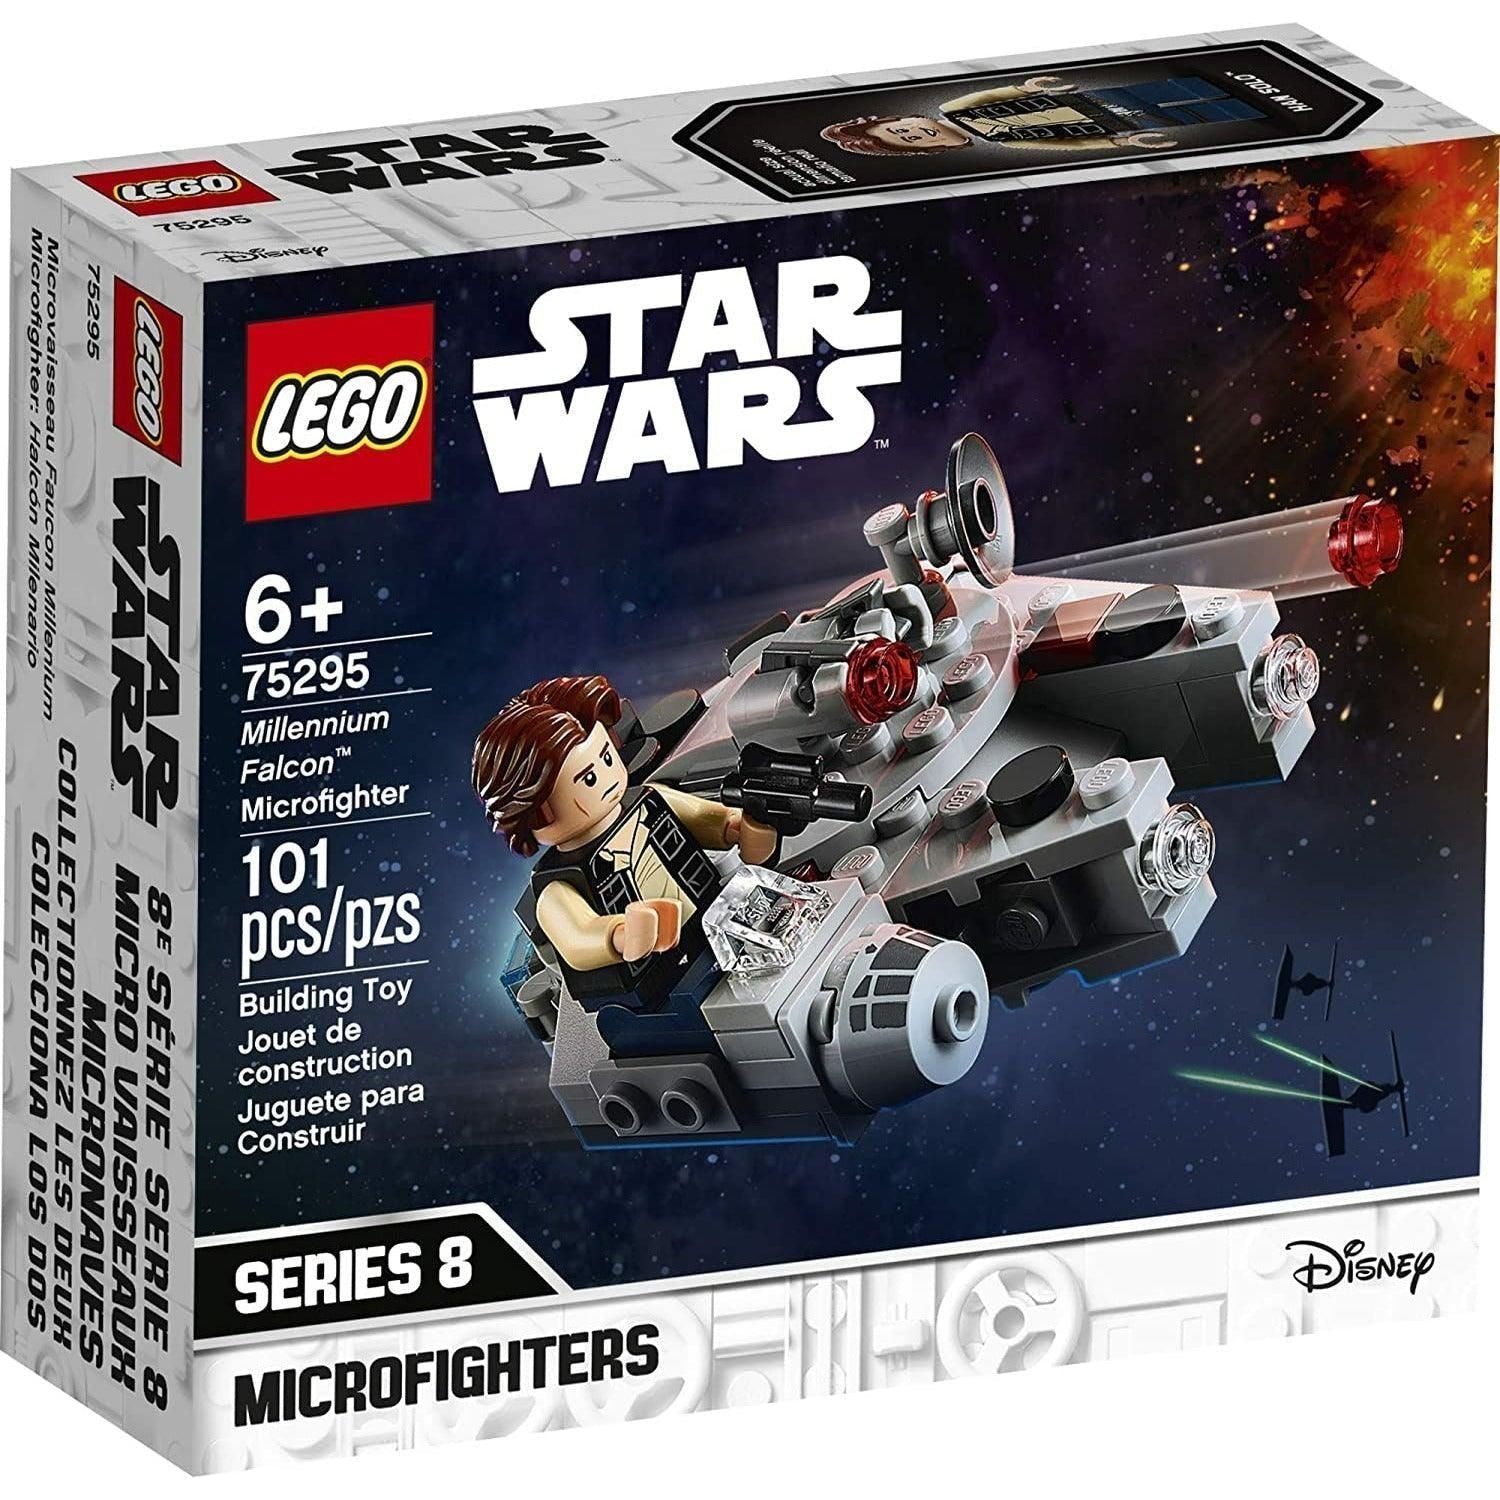 LEGO Star Wars Millennium Falcon Microfighter 75295 Building Kit (101 Pieces) - BumbleToys - 6+ Years, Boys, LEGO, OXE, star wars